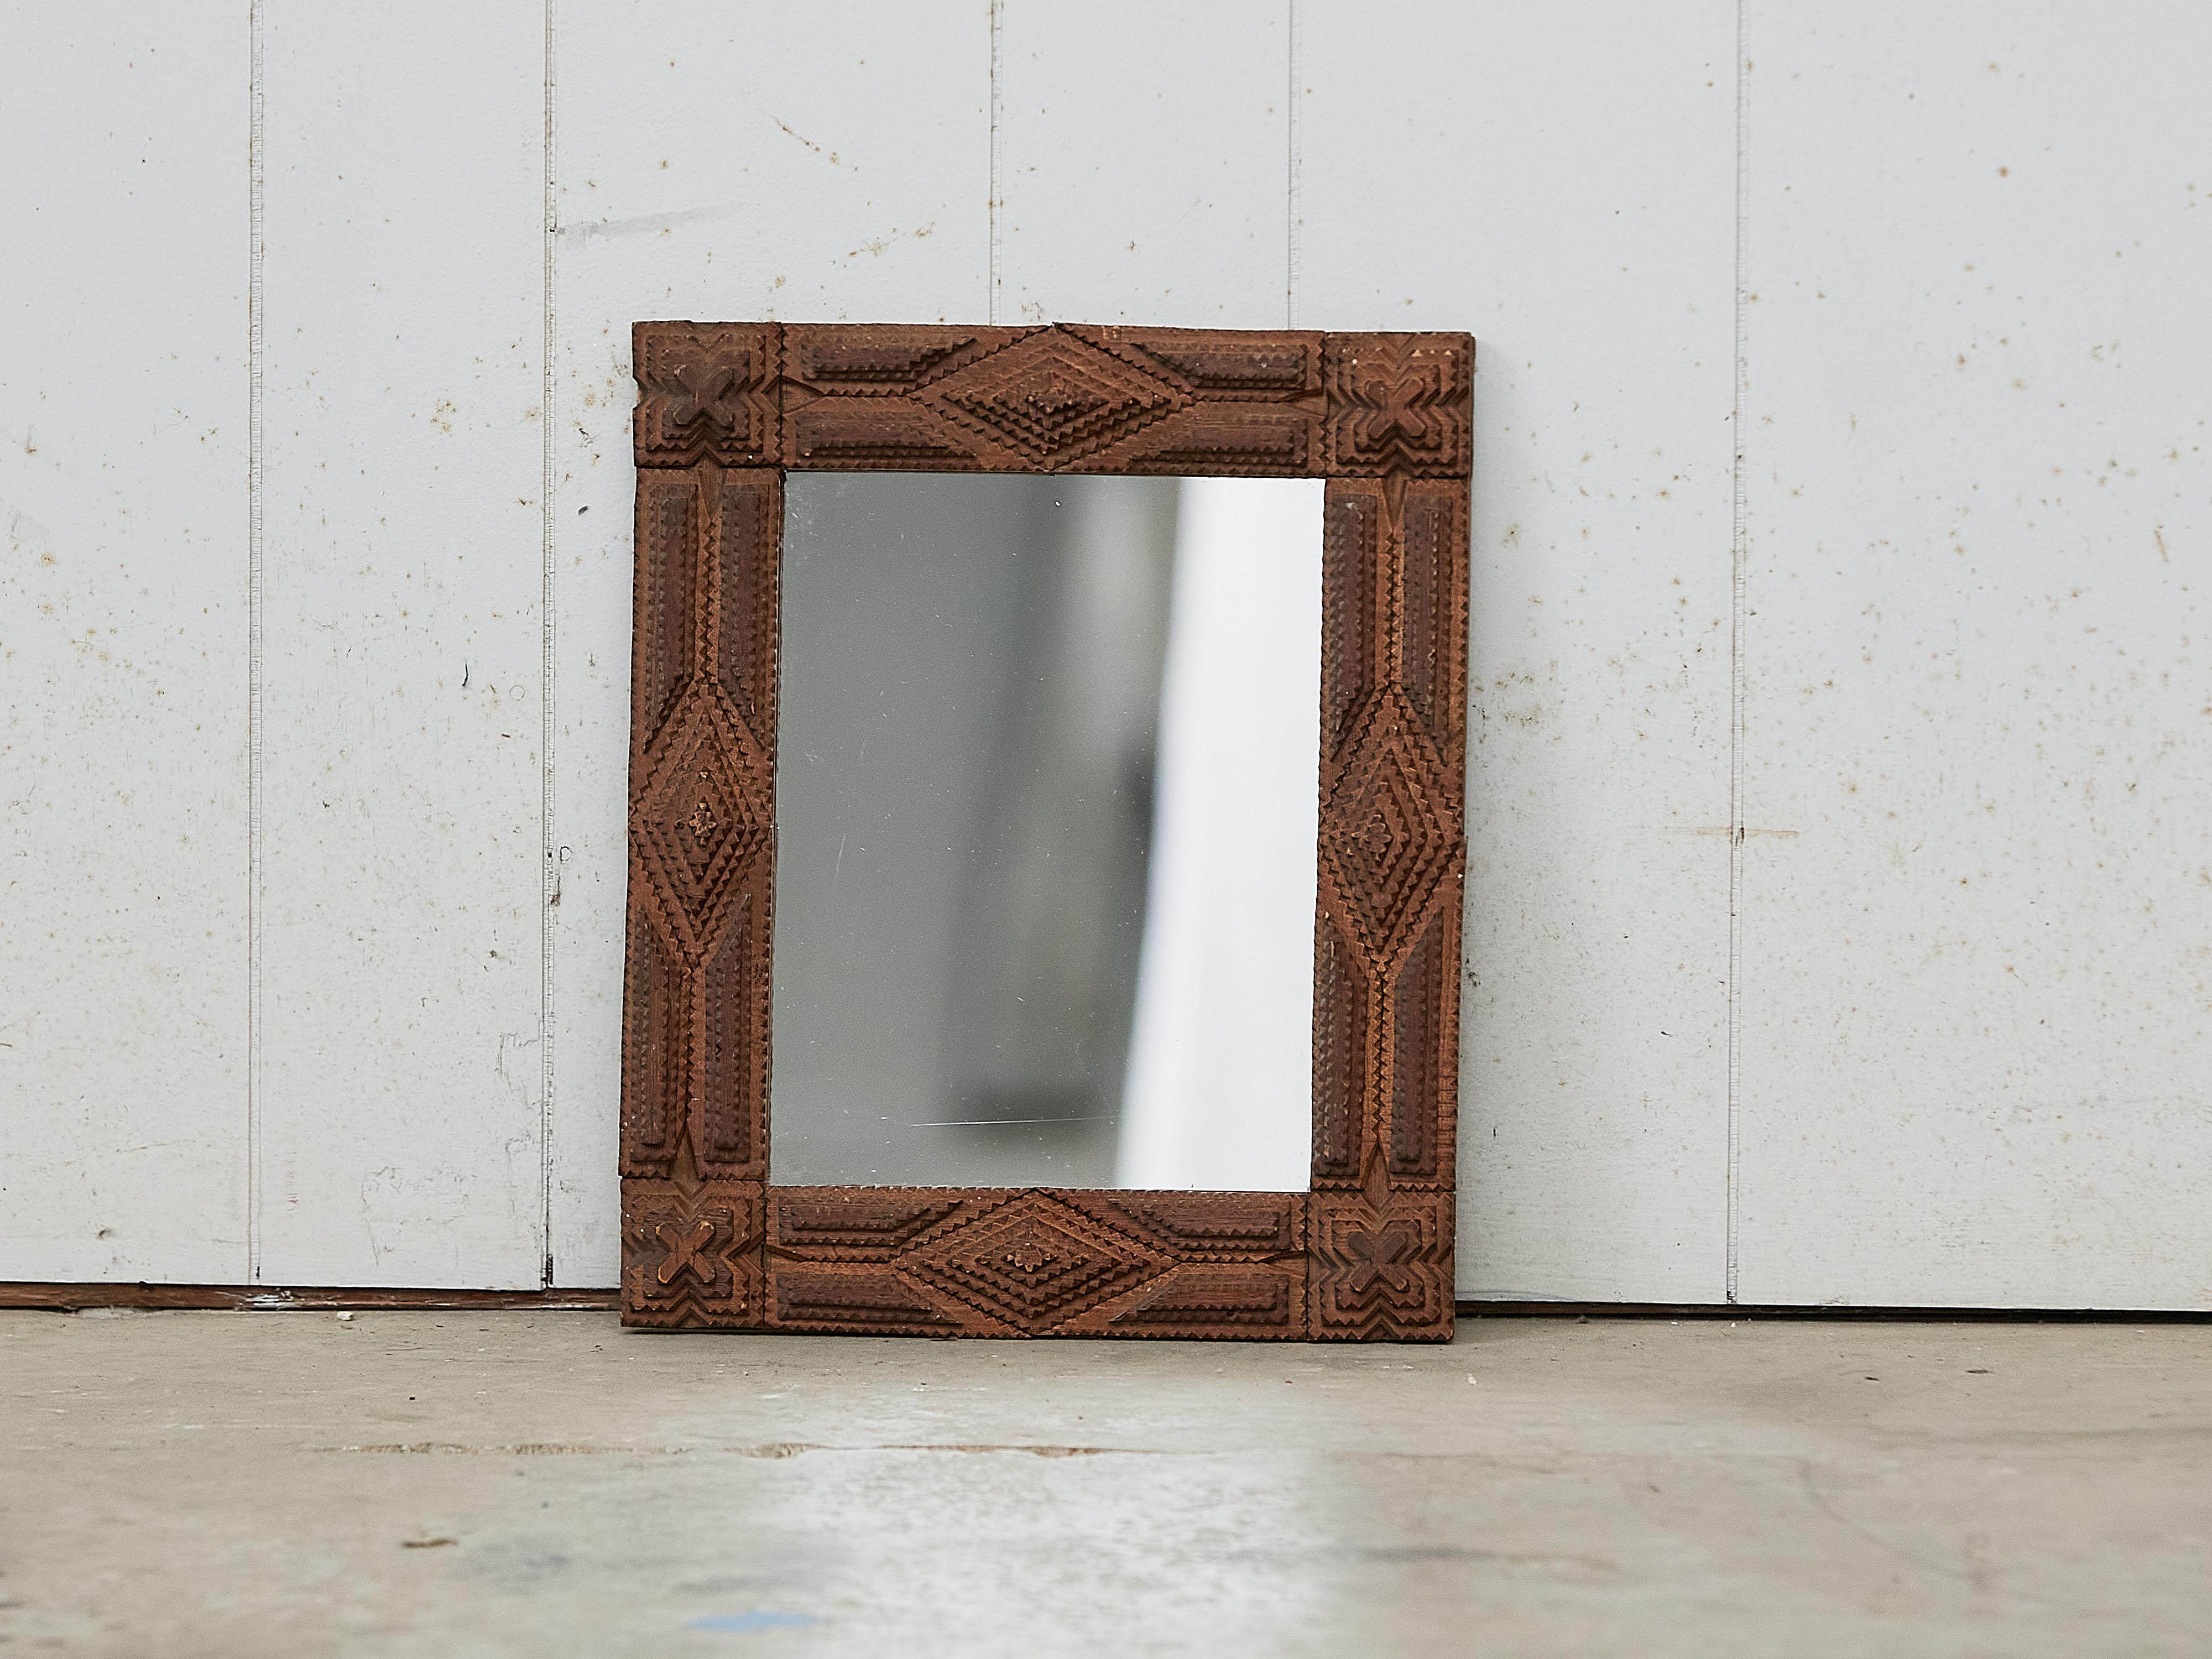 A French rectangular Tramp Art hand carved wooden mirror from the early 20th century, with raised diamond motifs and X patterns. Created in France during the Turn of the Century which saw the transition between the 19th to the 20th, this wall mirror